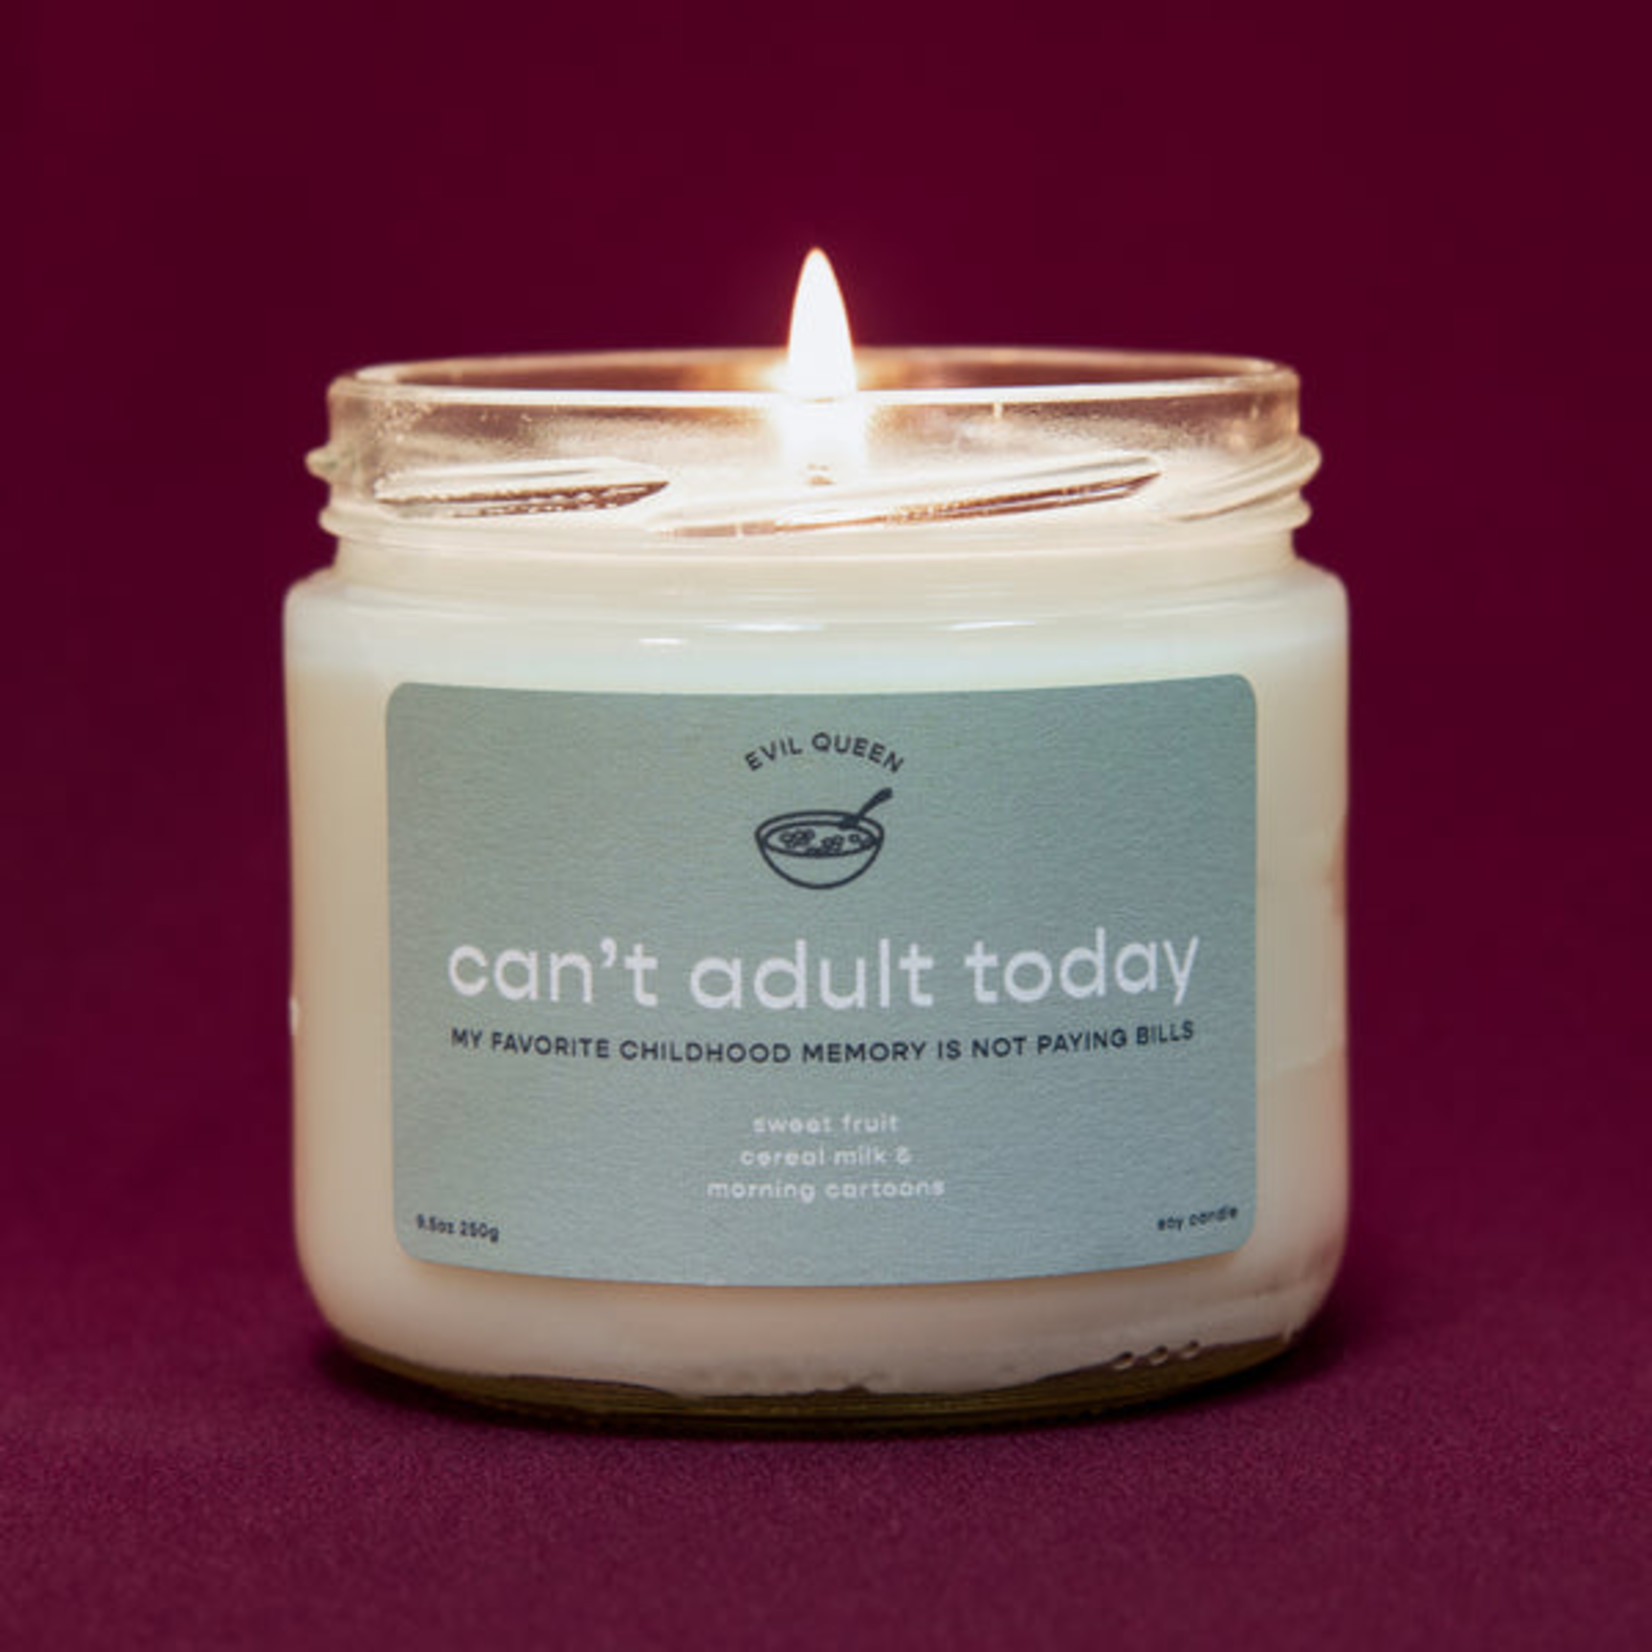 Evil Queen Evil Queen - Can't Adult Today Candle